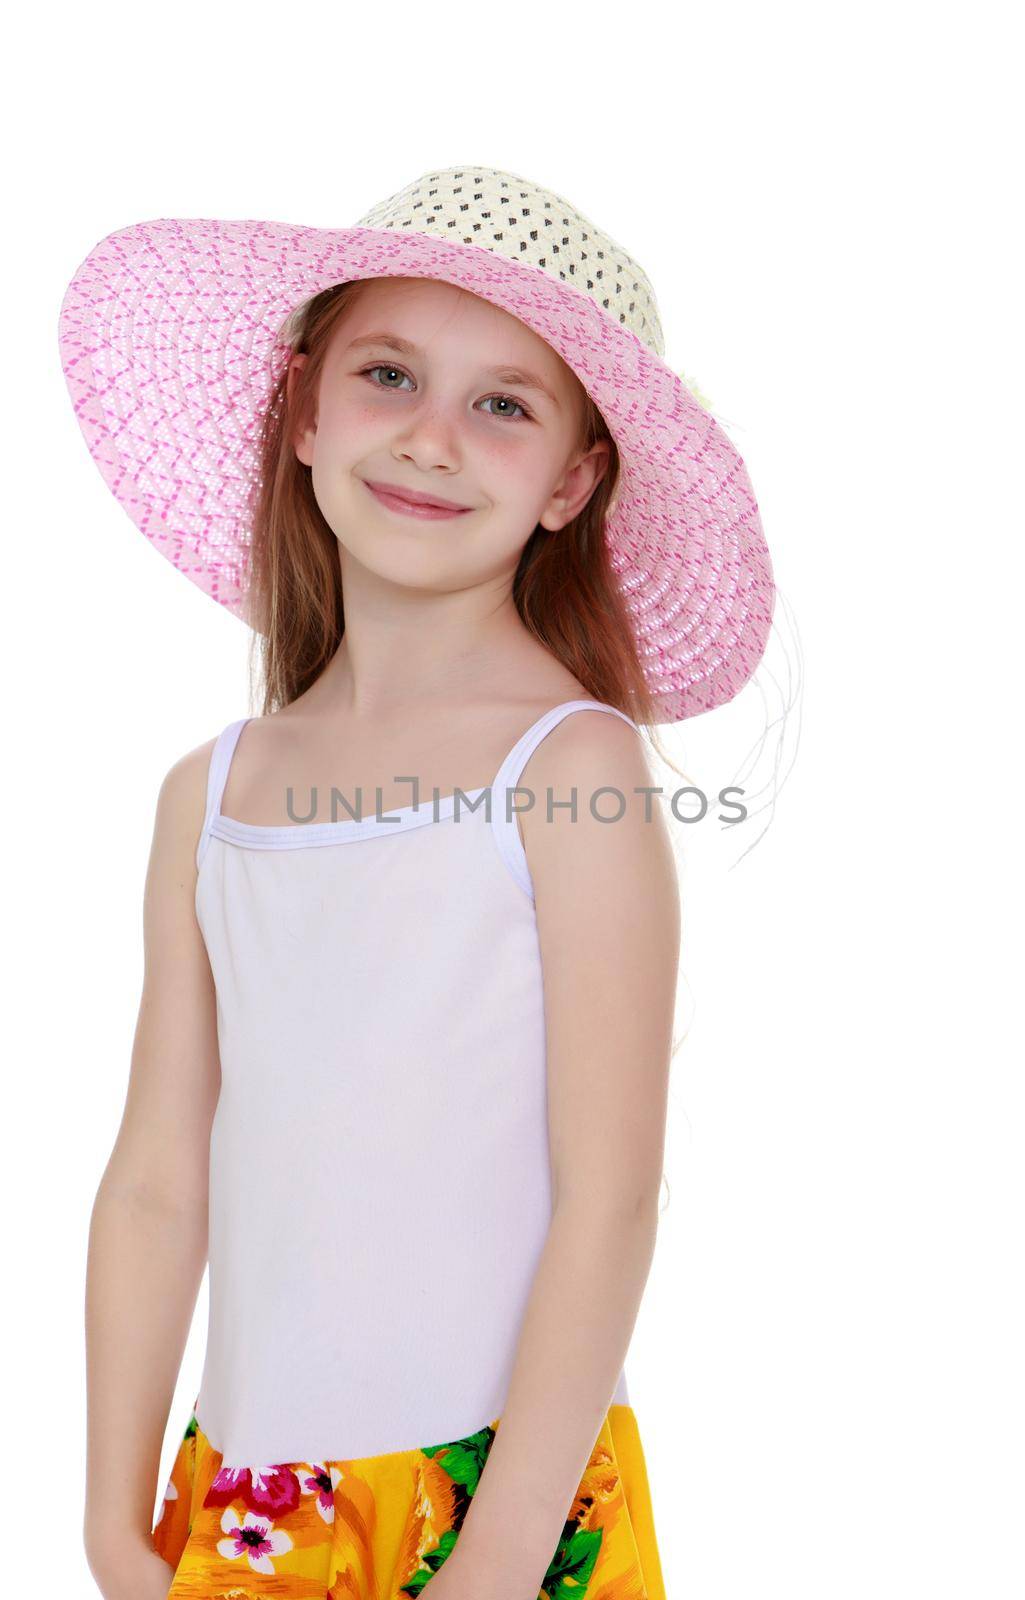 Cute little girl in pink hat and white tank top without a pattern . Close-up - Isolated on white background